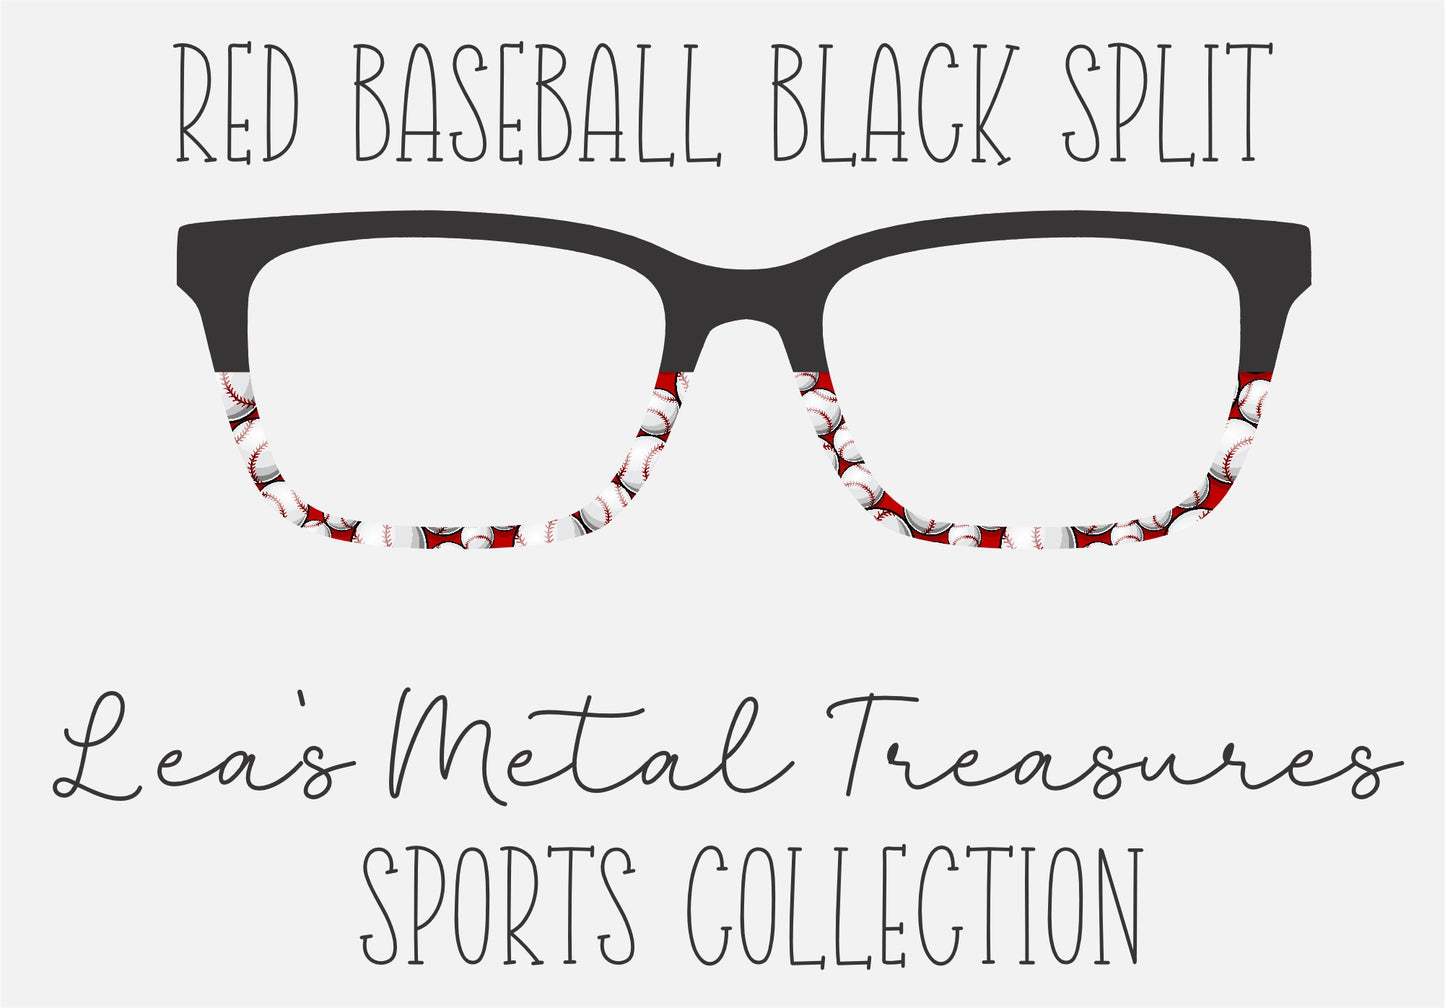 Red Baseball black split Eyewear Frame Toppers COMES WITH MAGNETS